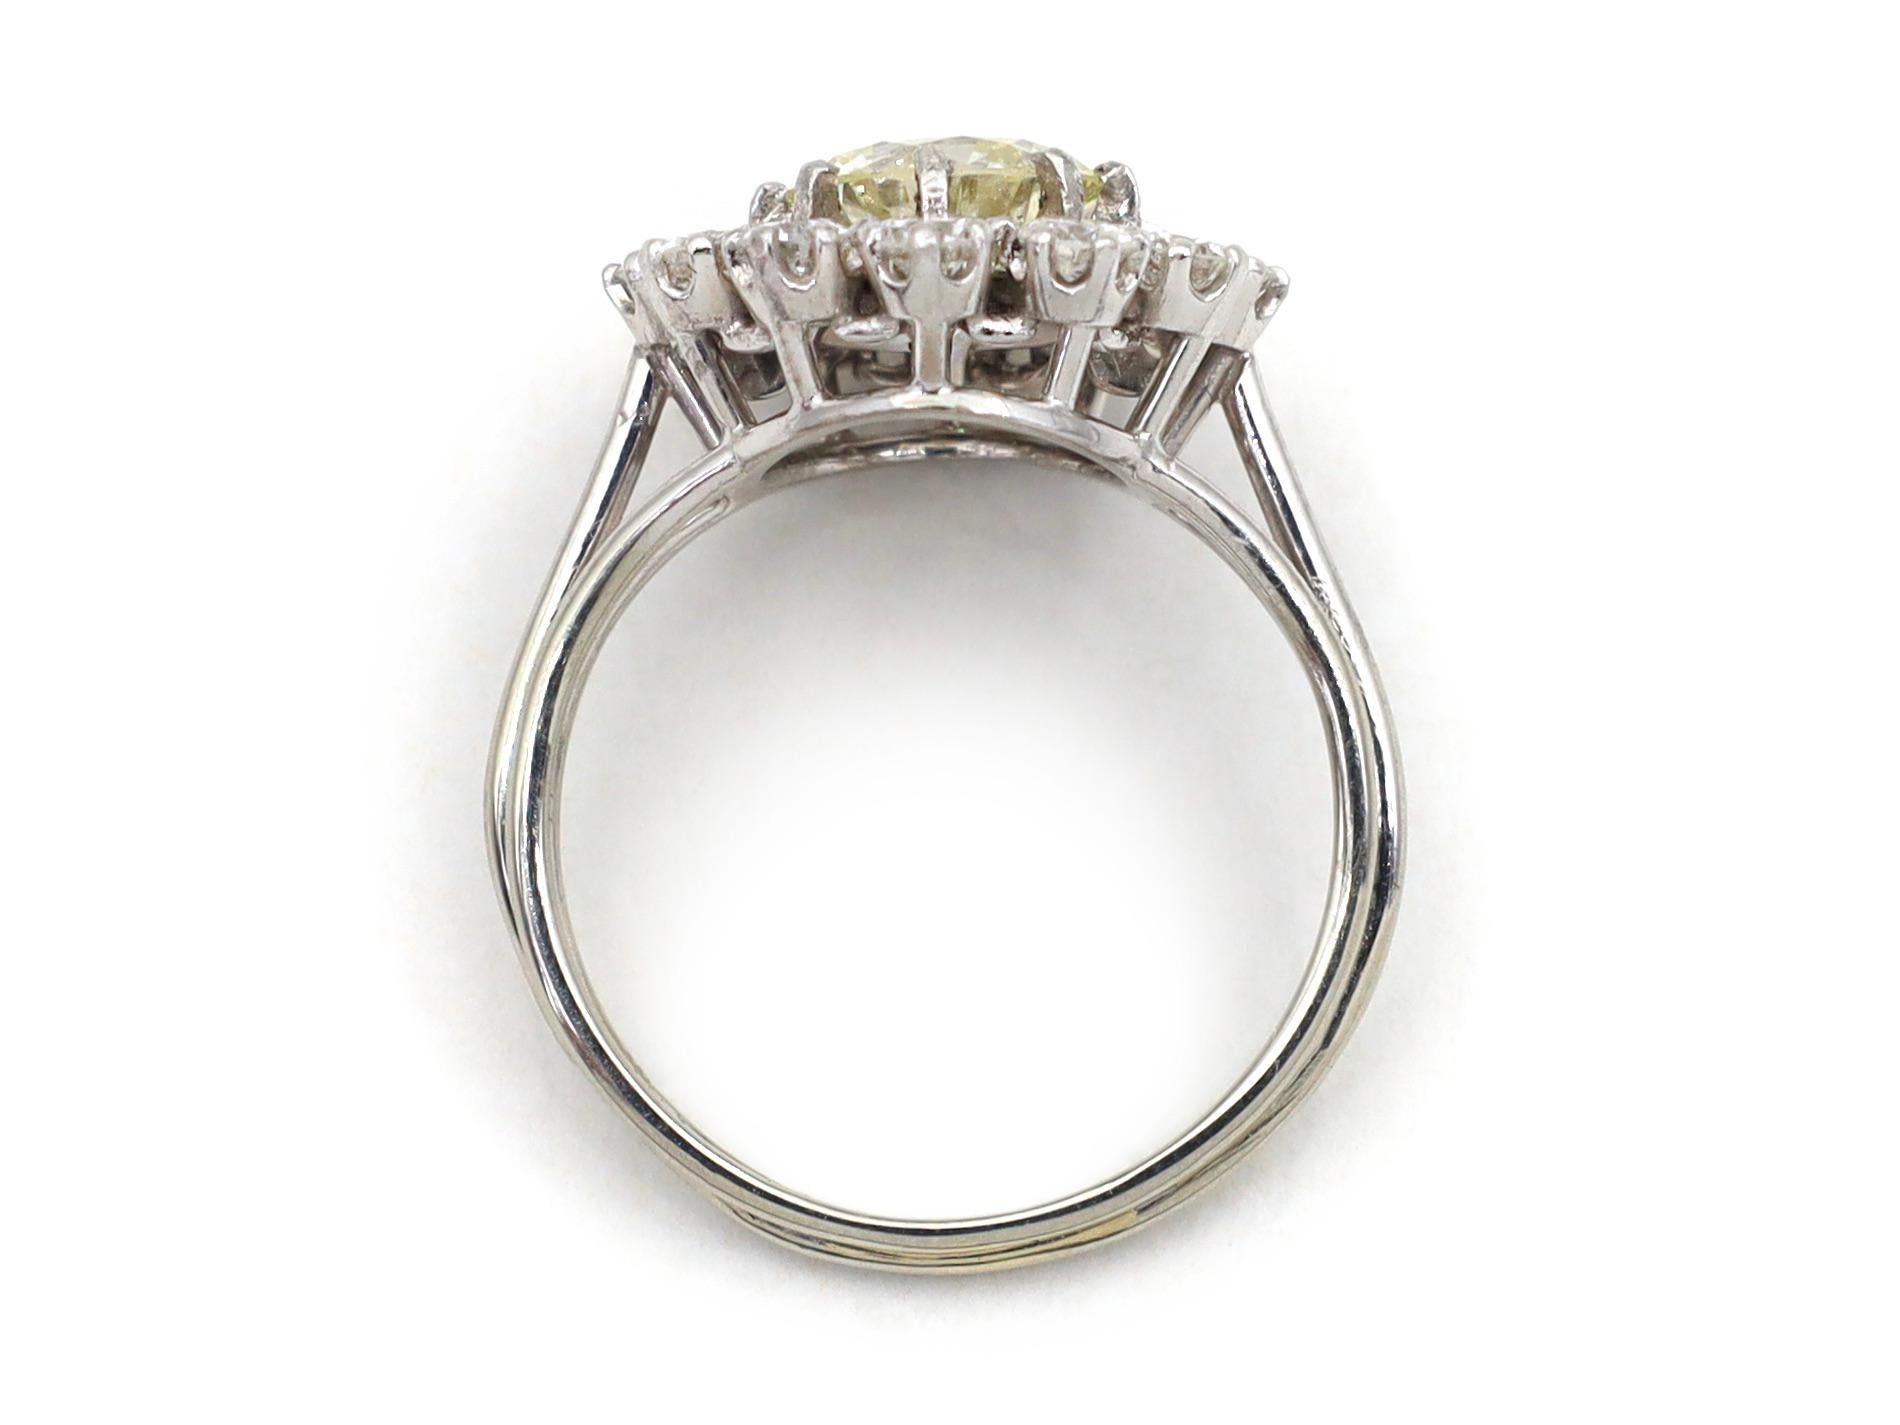 Modern French 1.18ct Pale Yellow Diamond Cluster Ring in Platinum and 18kt White Gold For Sale